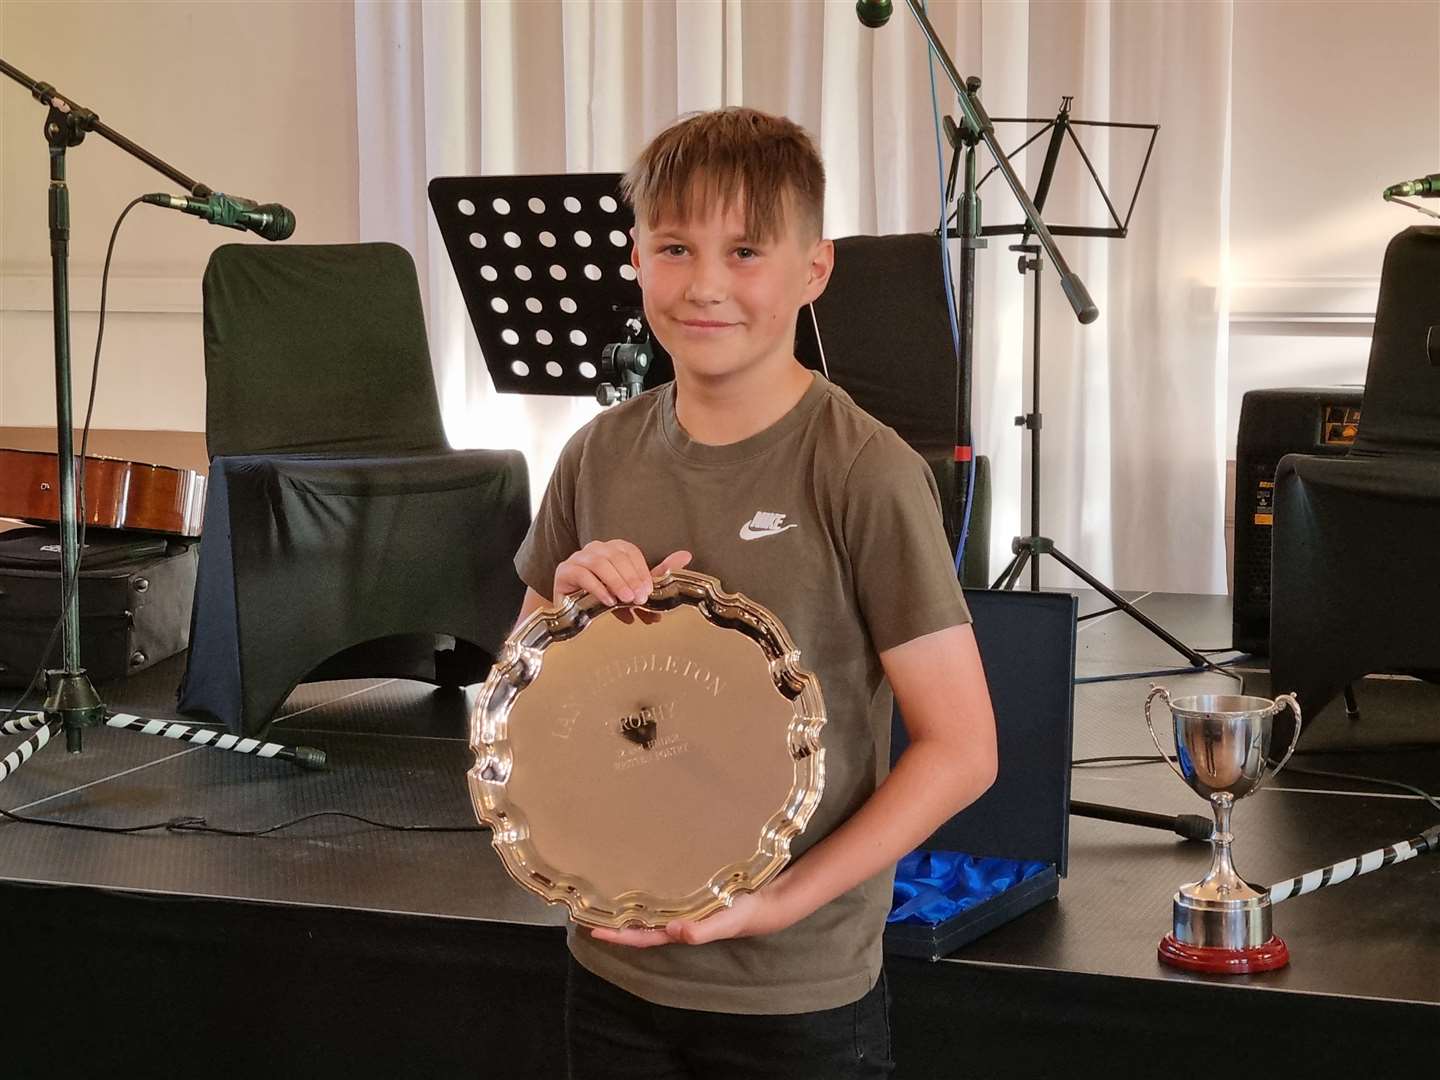 Keith Primary's Noah Crocket won the Ian Middleton Trophy for a poem about his big brother.